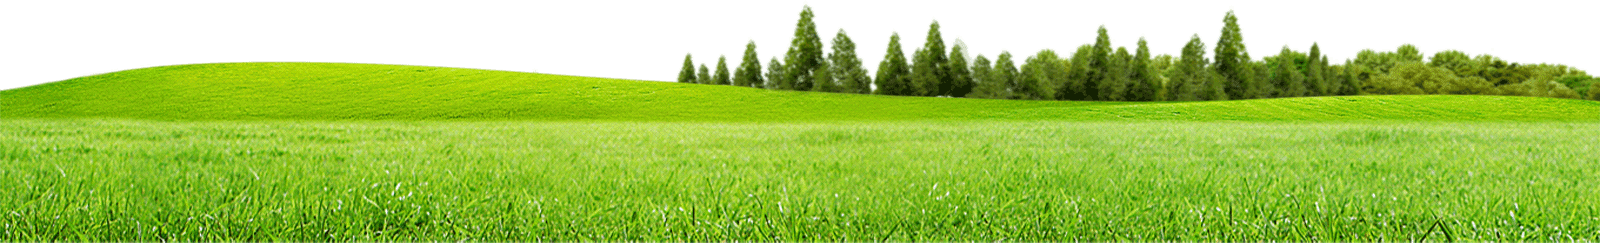 land clipart meadow